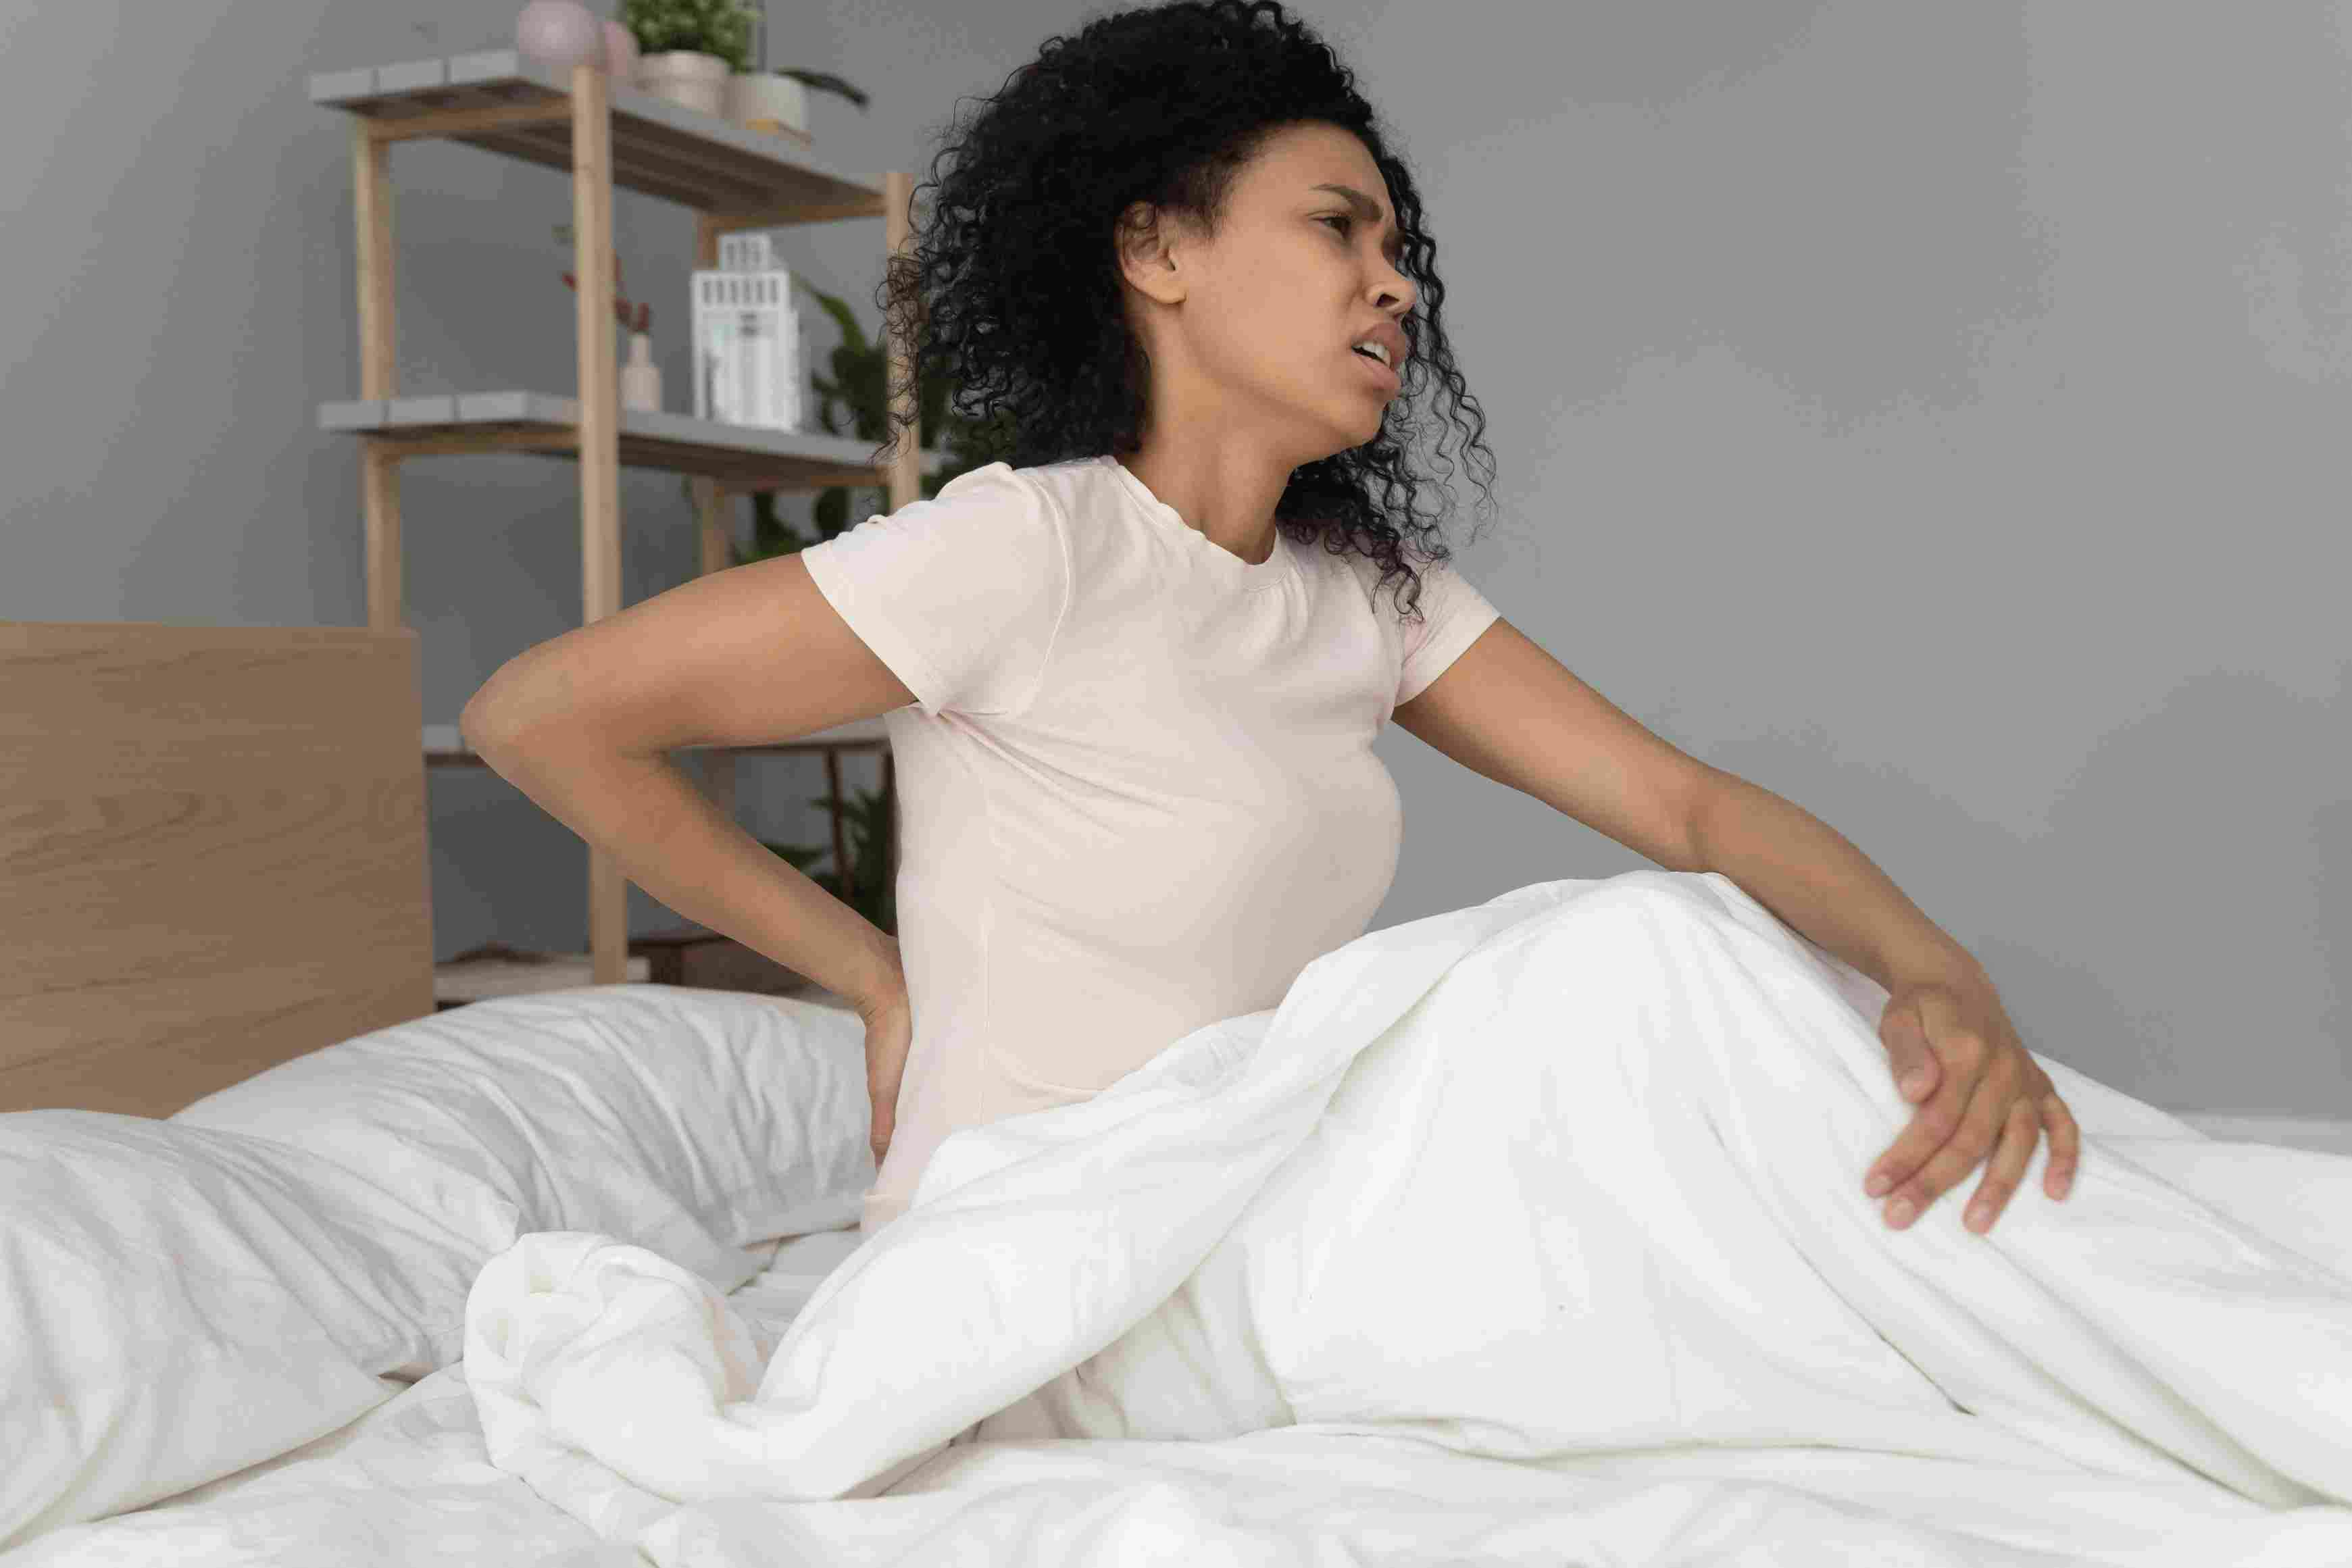 woman wakes up with sore back